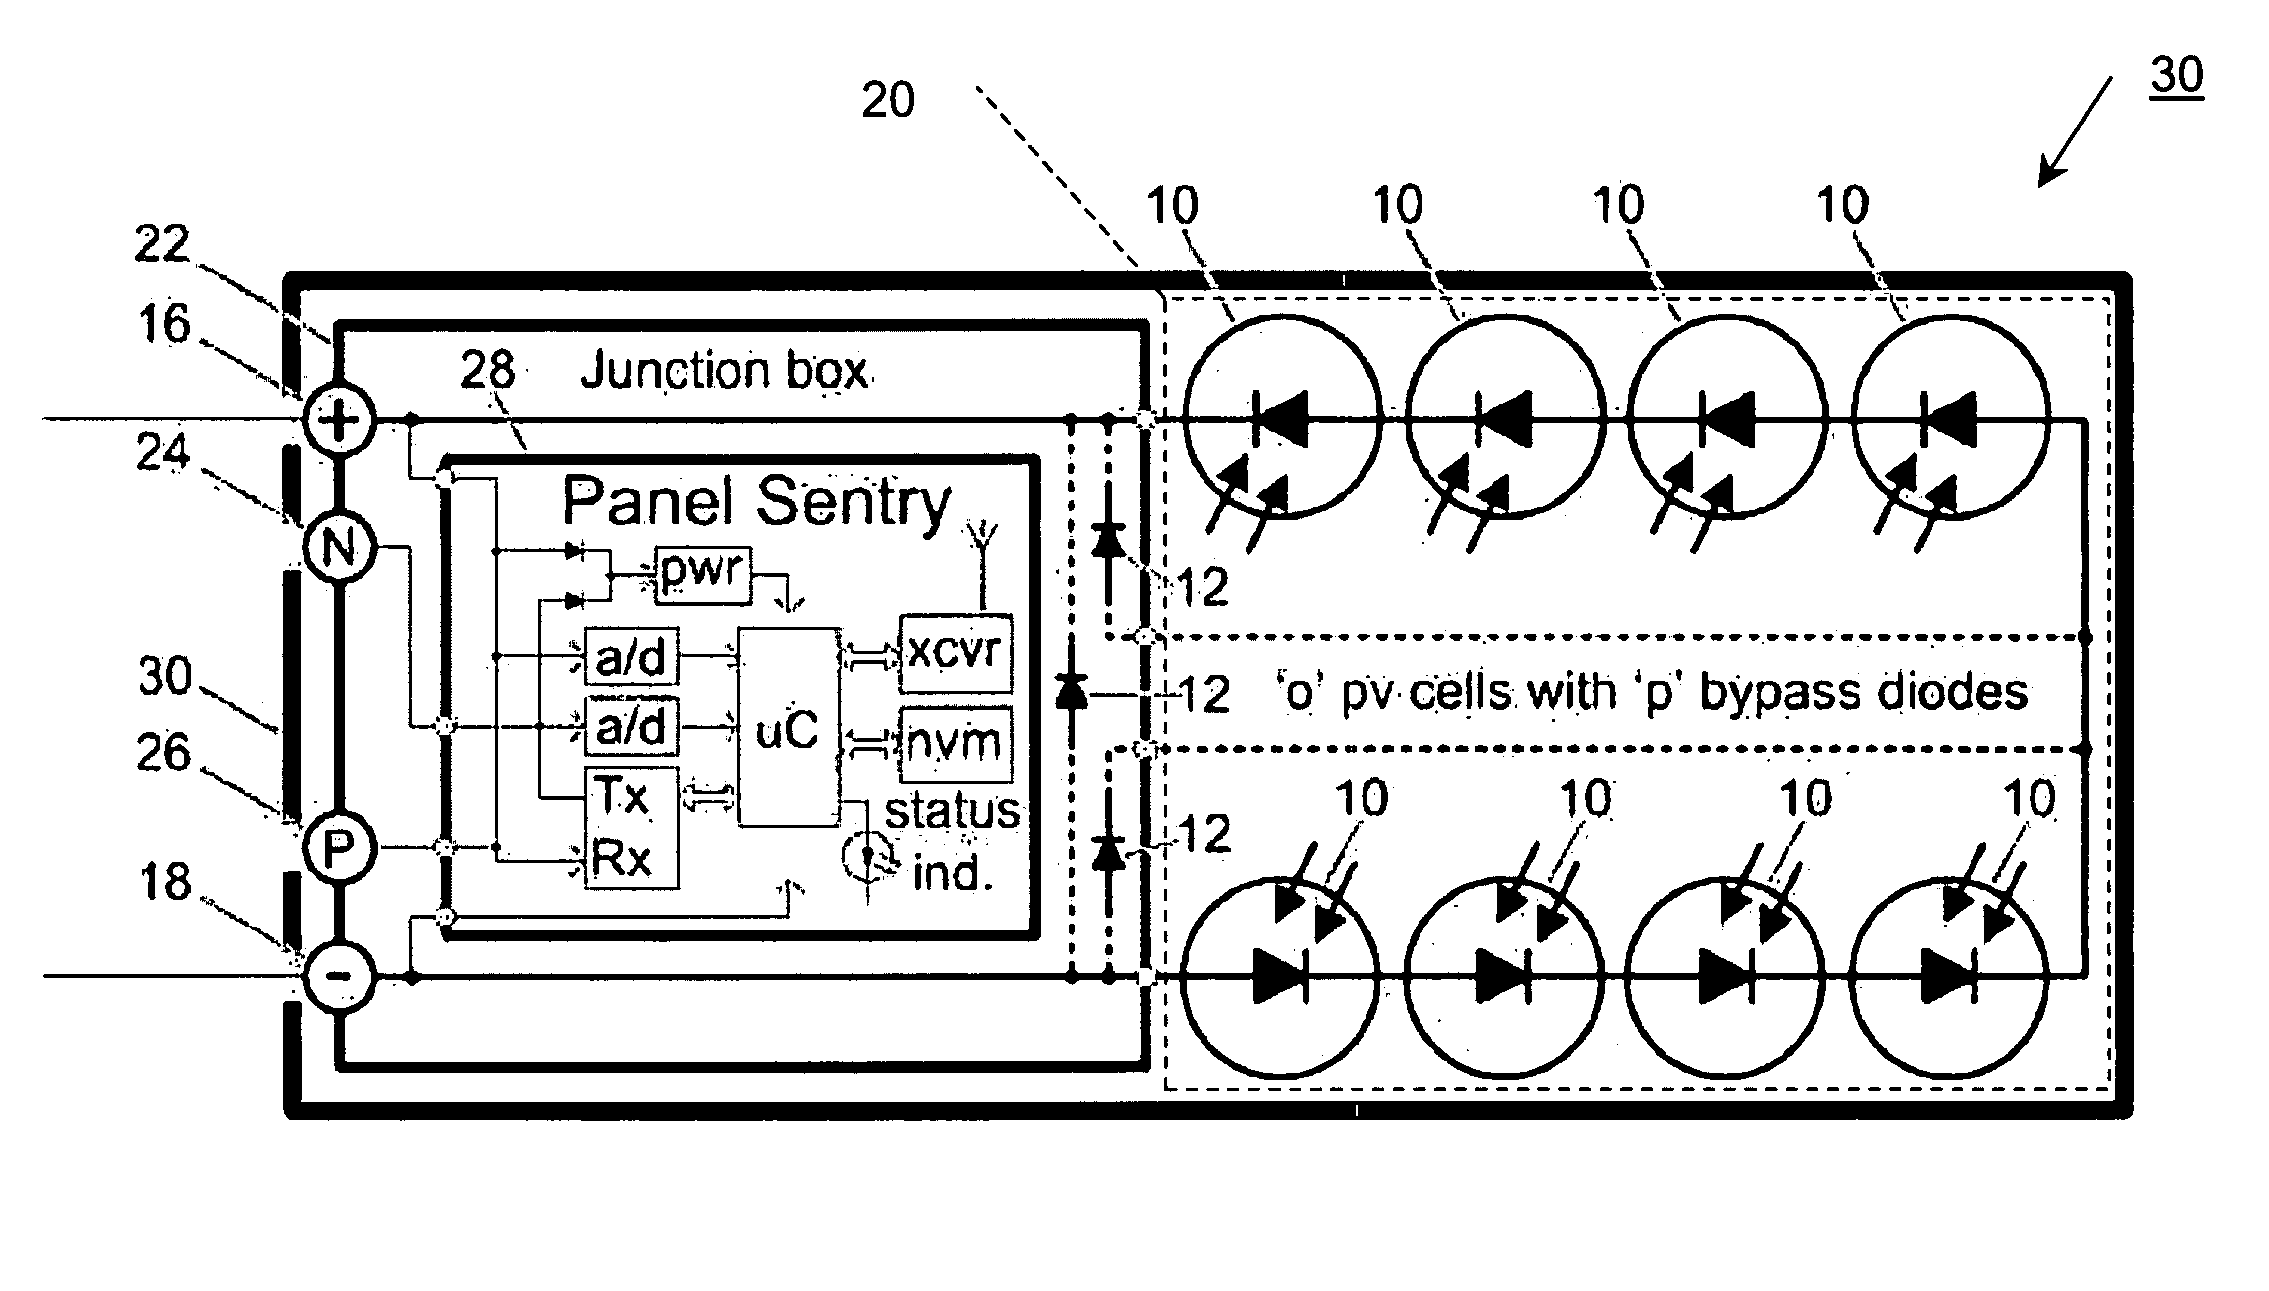 System and method for monitoring photovoltaic power generation systems